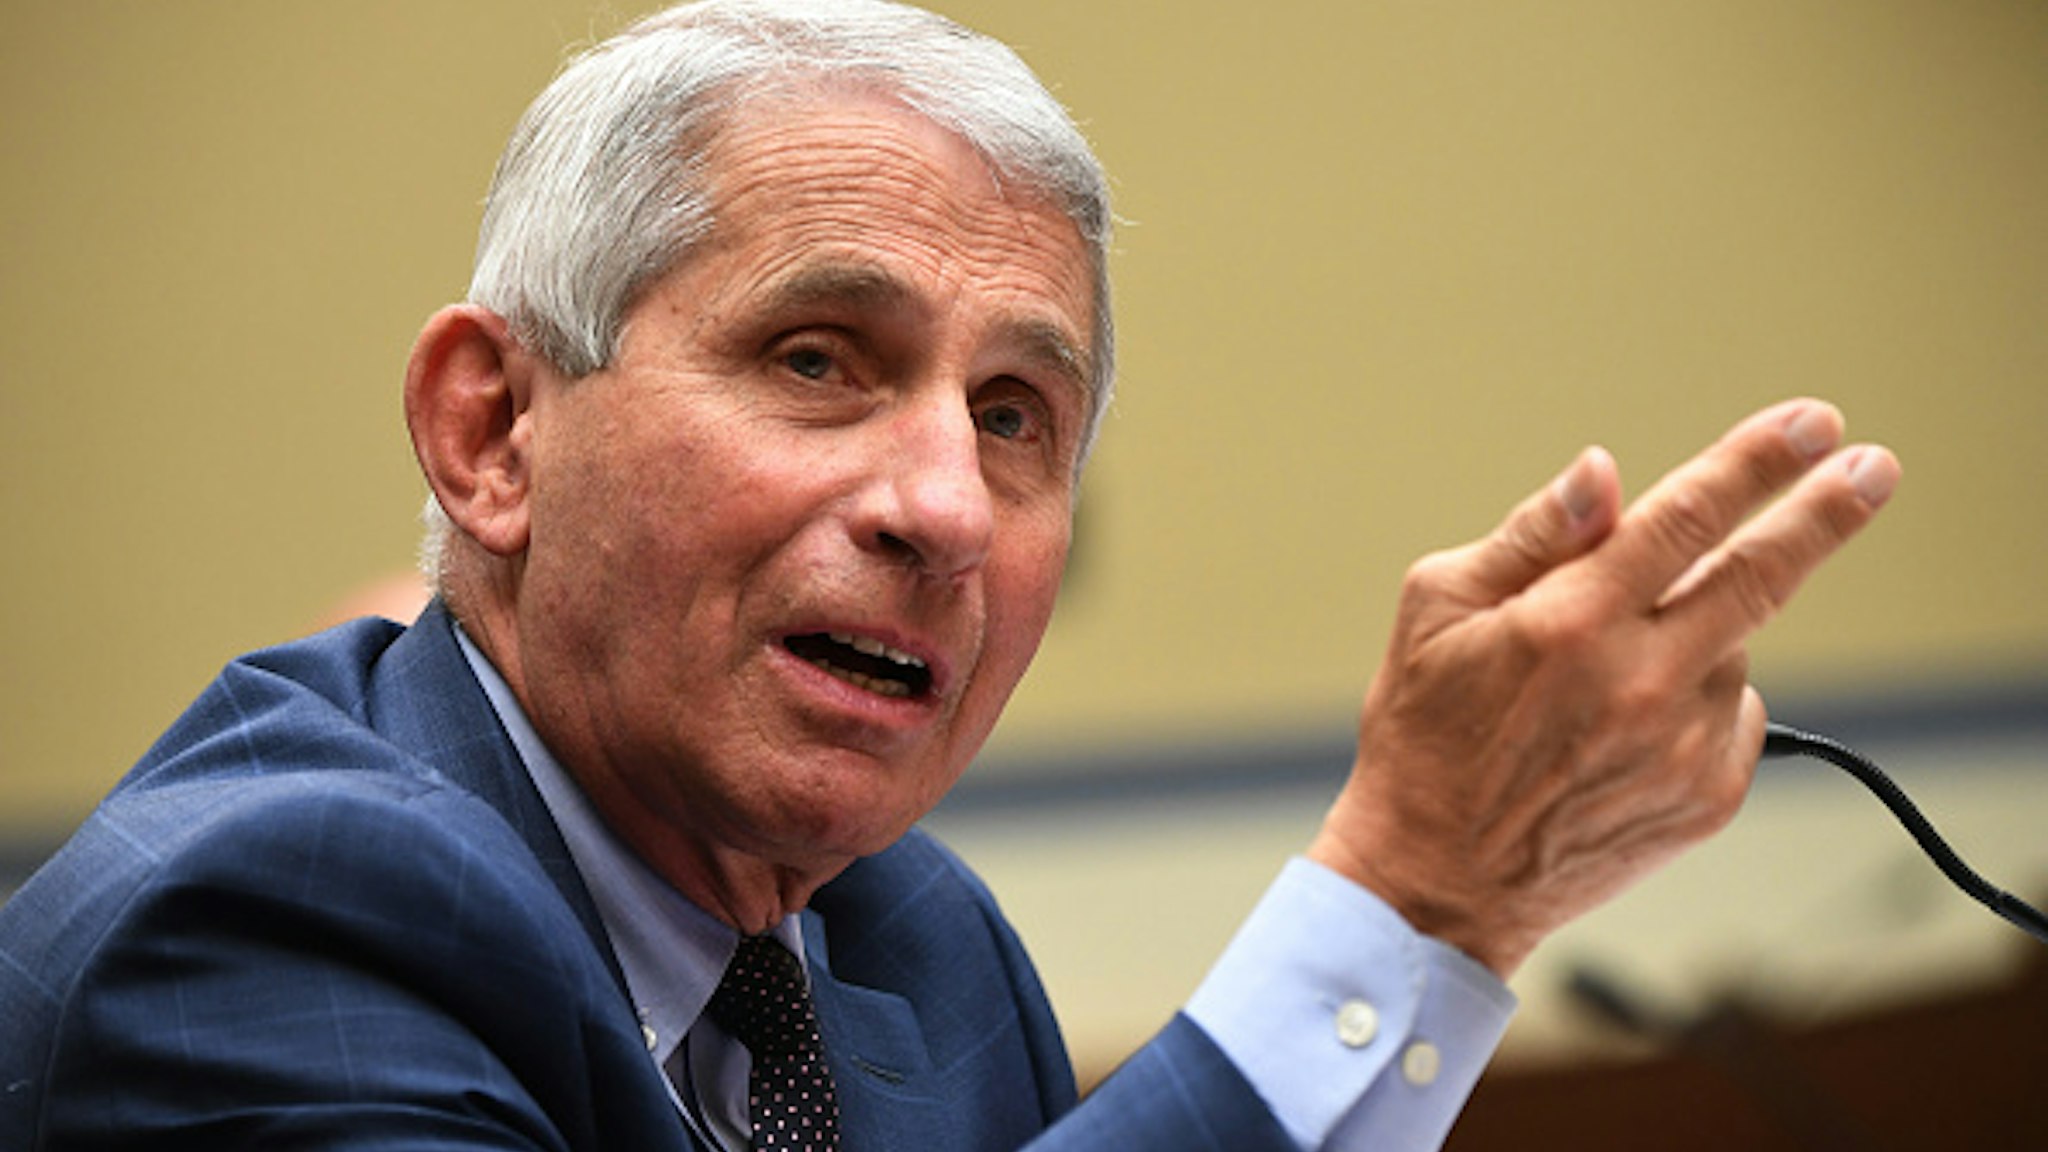 Anthony Fauci, director of the National Institute for Allergy and Infectious Diseases, testifies during a House Subcommittee on the Coronavirus Crisis hearing on a national plan to contain the COVID-19 pandemic, on Capitol Hill in Washington, DC on July 31, 2020.